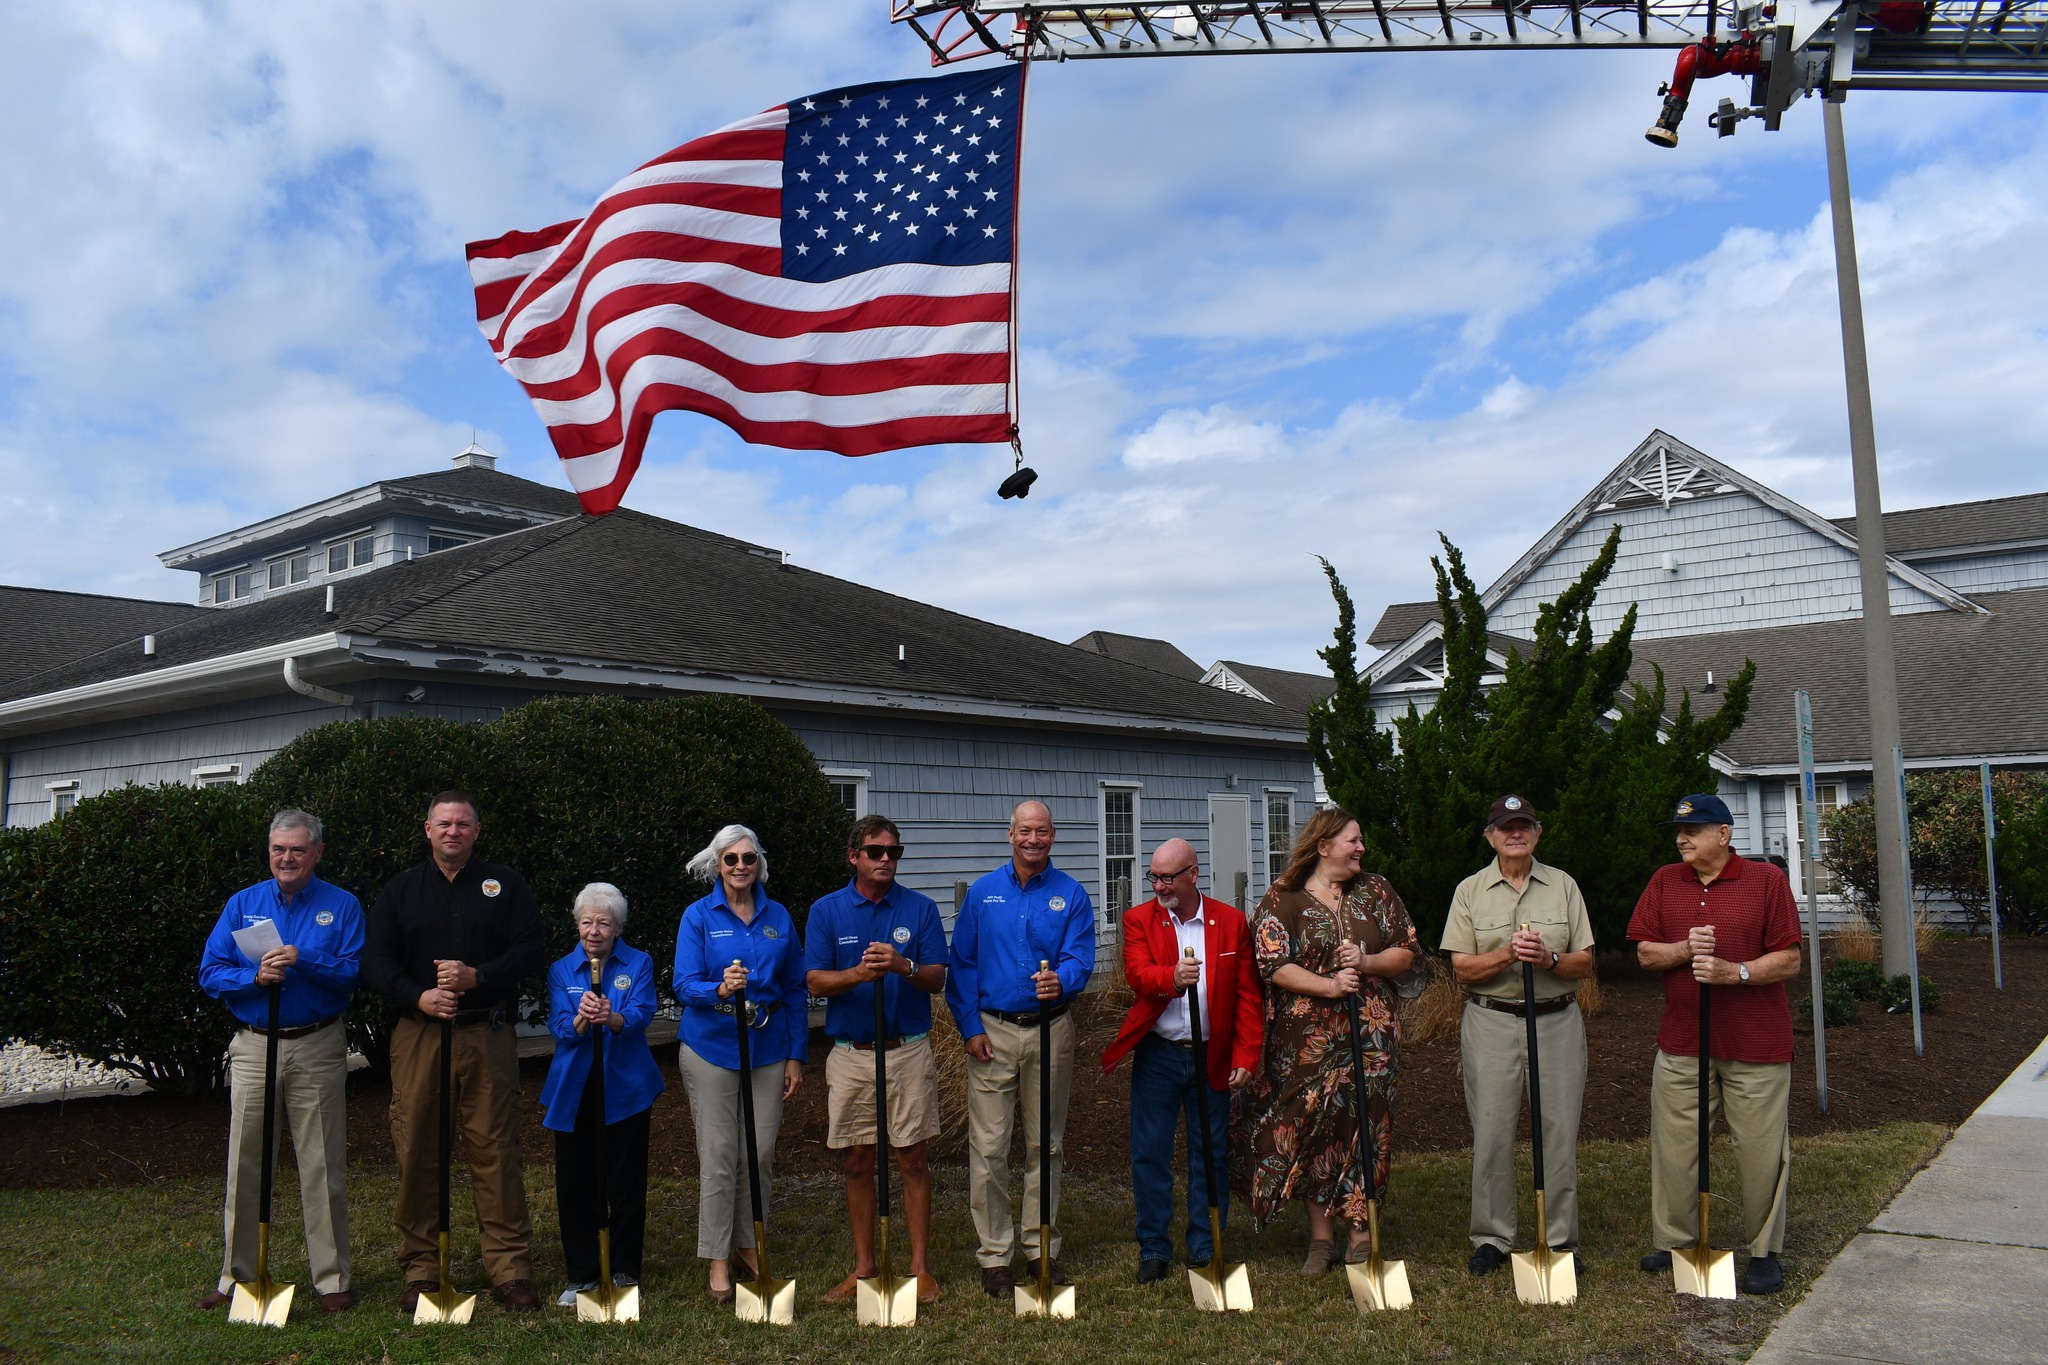 GALLERY: Groundbreaking for new Kitty Hawk Police Department headquarters